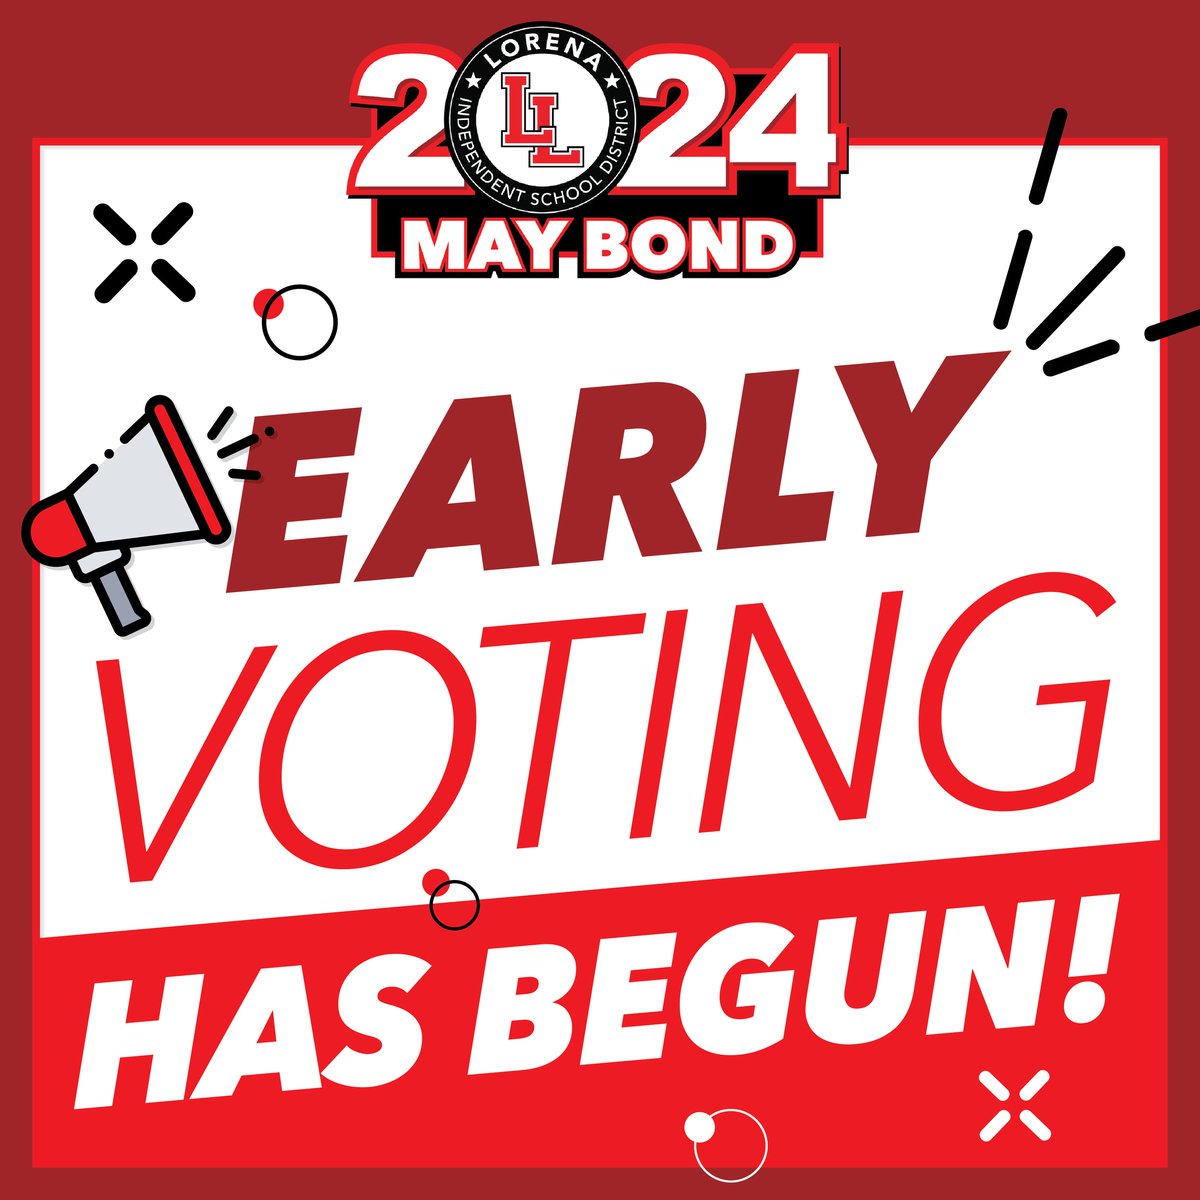 Lorena ISD wants all voters and community members to be informed about the bond election. Go to lorenaisdbond.com to find everything you need to know before casting your vote. Early voting has begun and ends April 30.